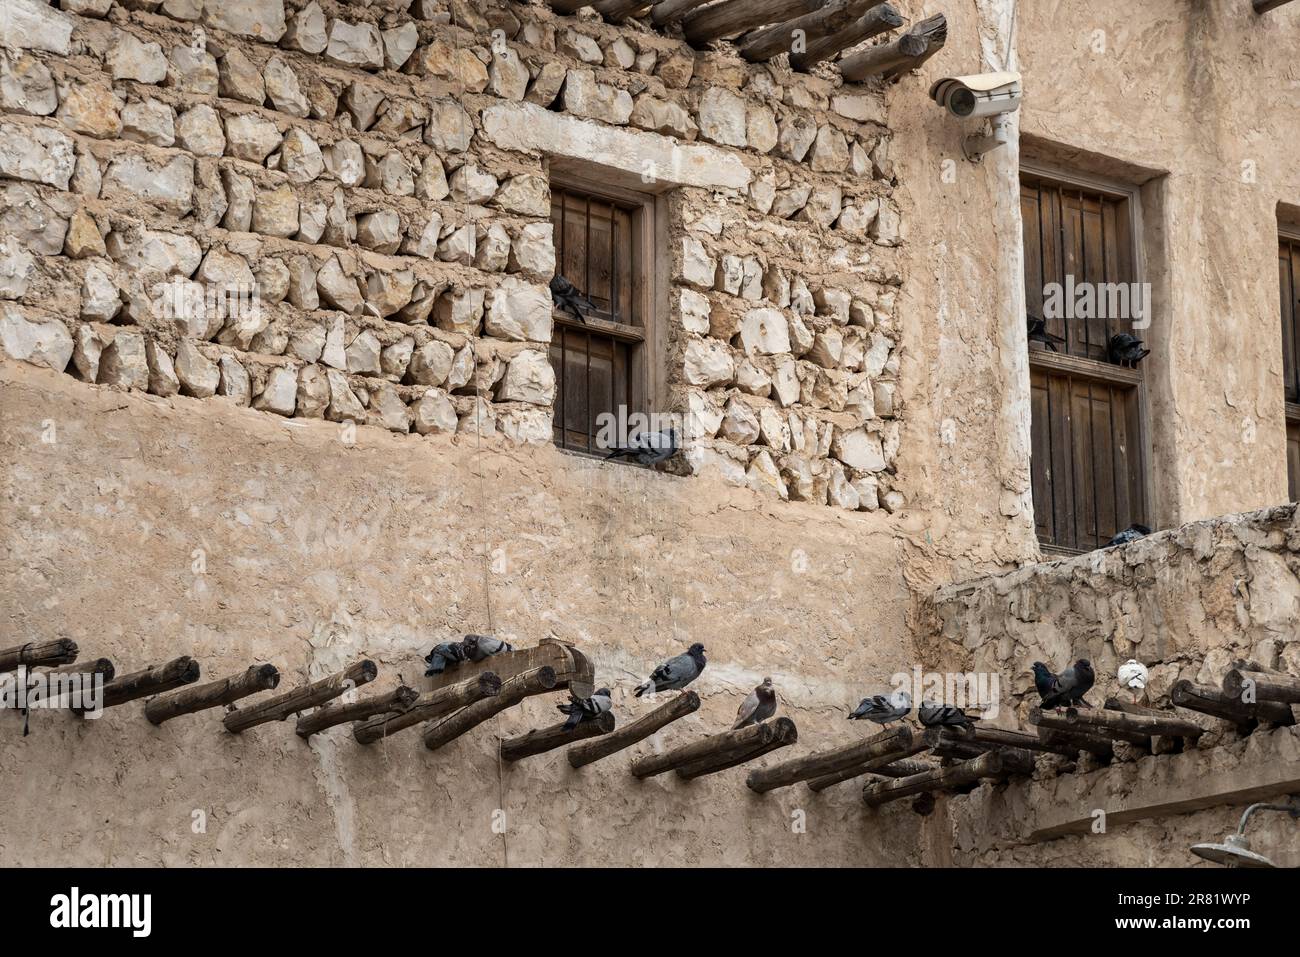 Birds sitting on a wooden poles of old house at Doha Qatar Stock Photo